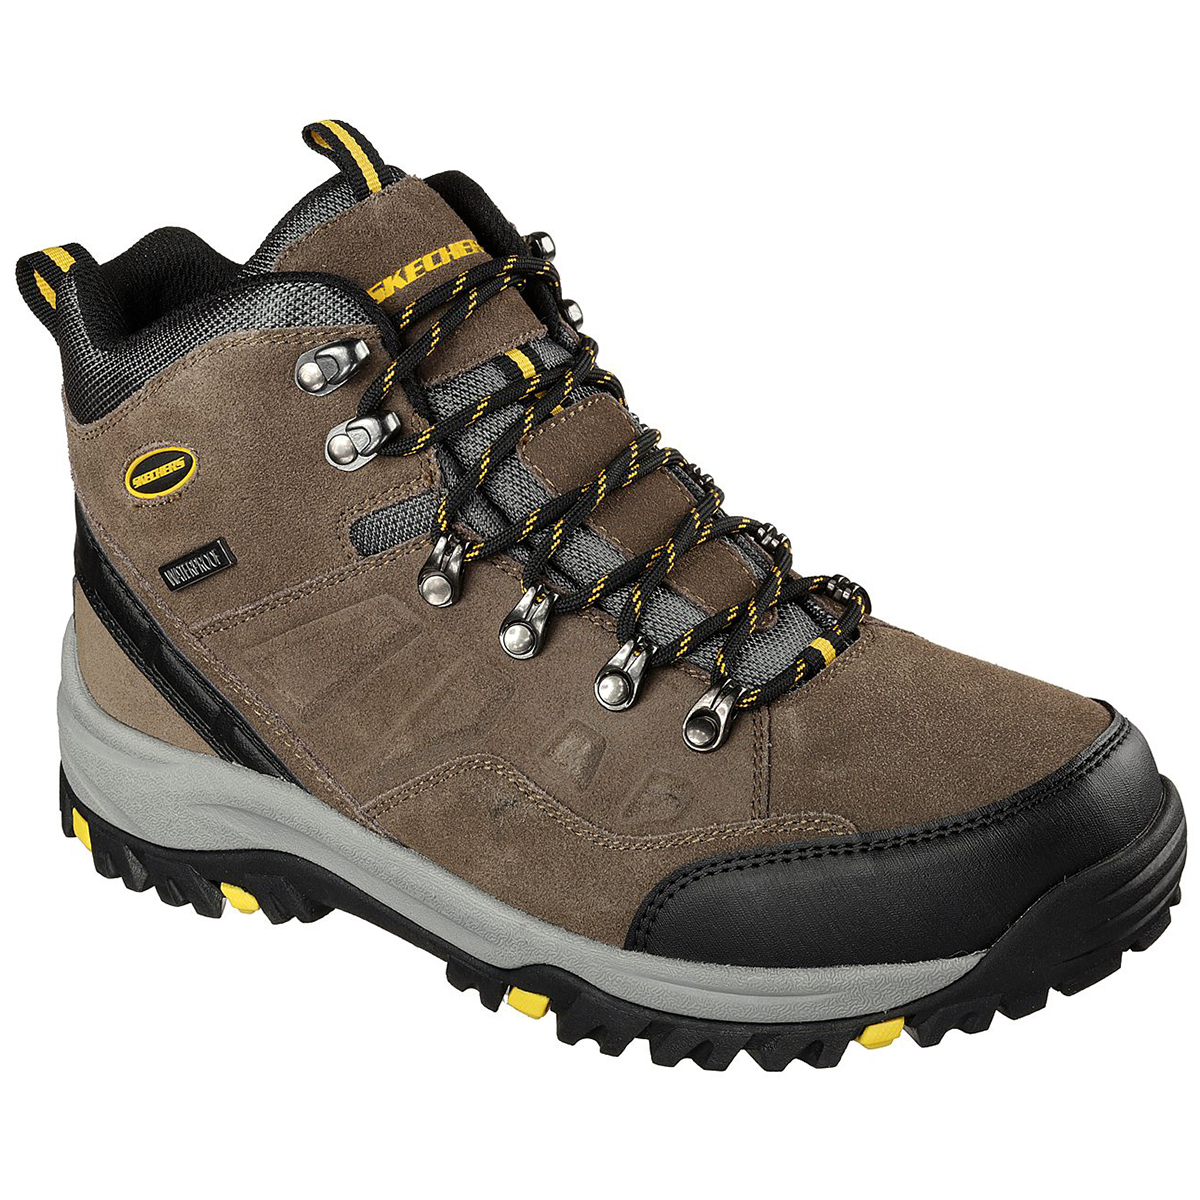 Skechers Men's Relaxed Fit: Relment A " Pelmo Mid Waterproof Hiking Boots